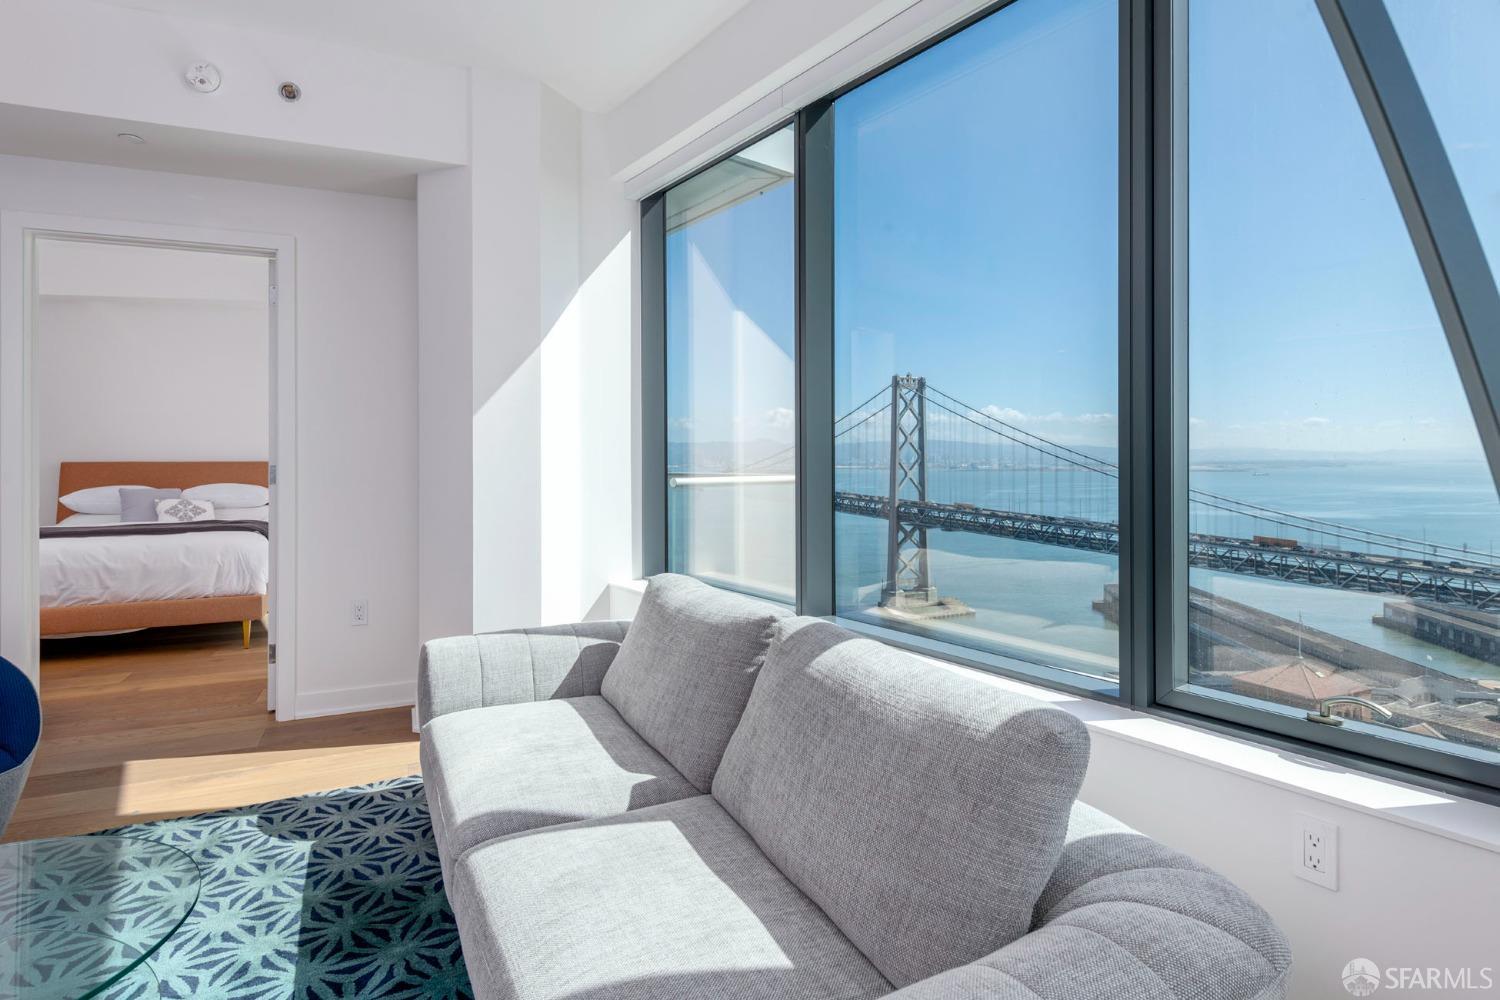 Photo of 280 Spear St #31C in San Francisco, CA